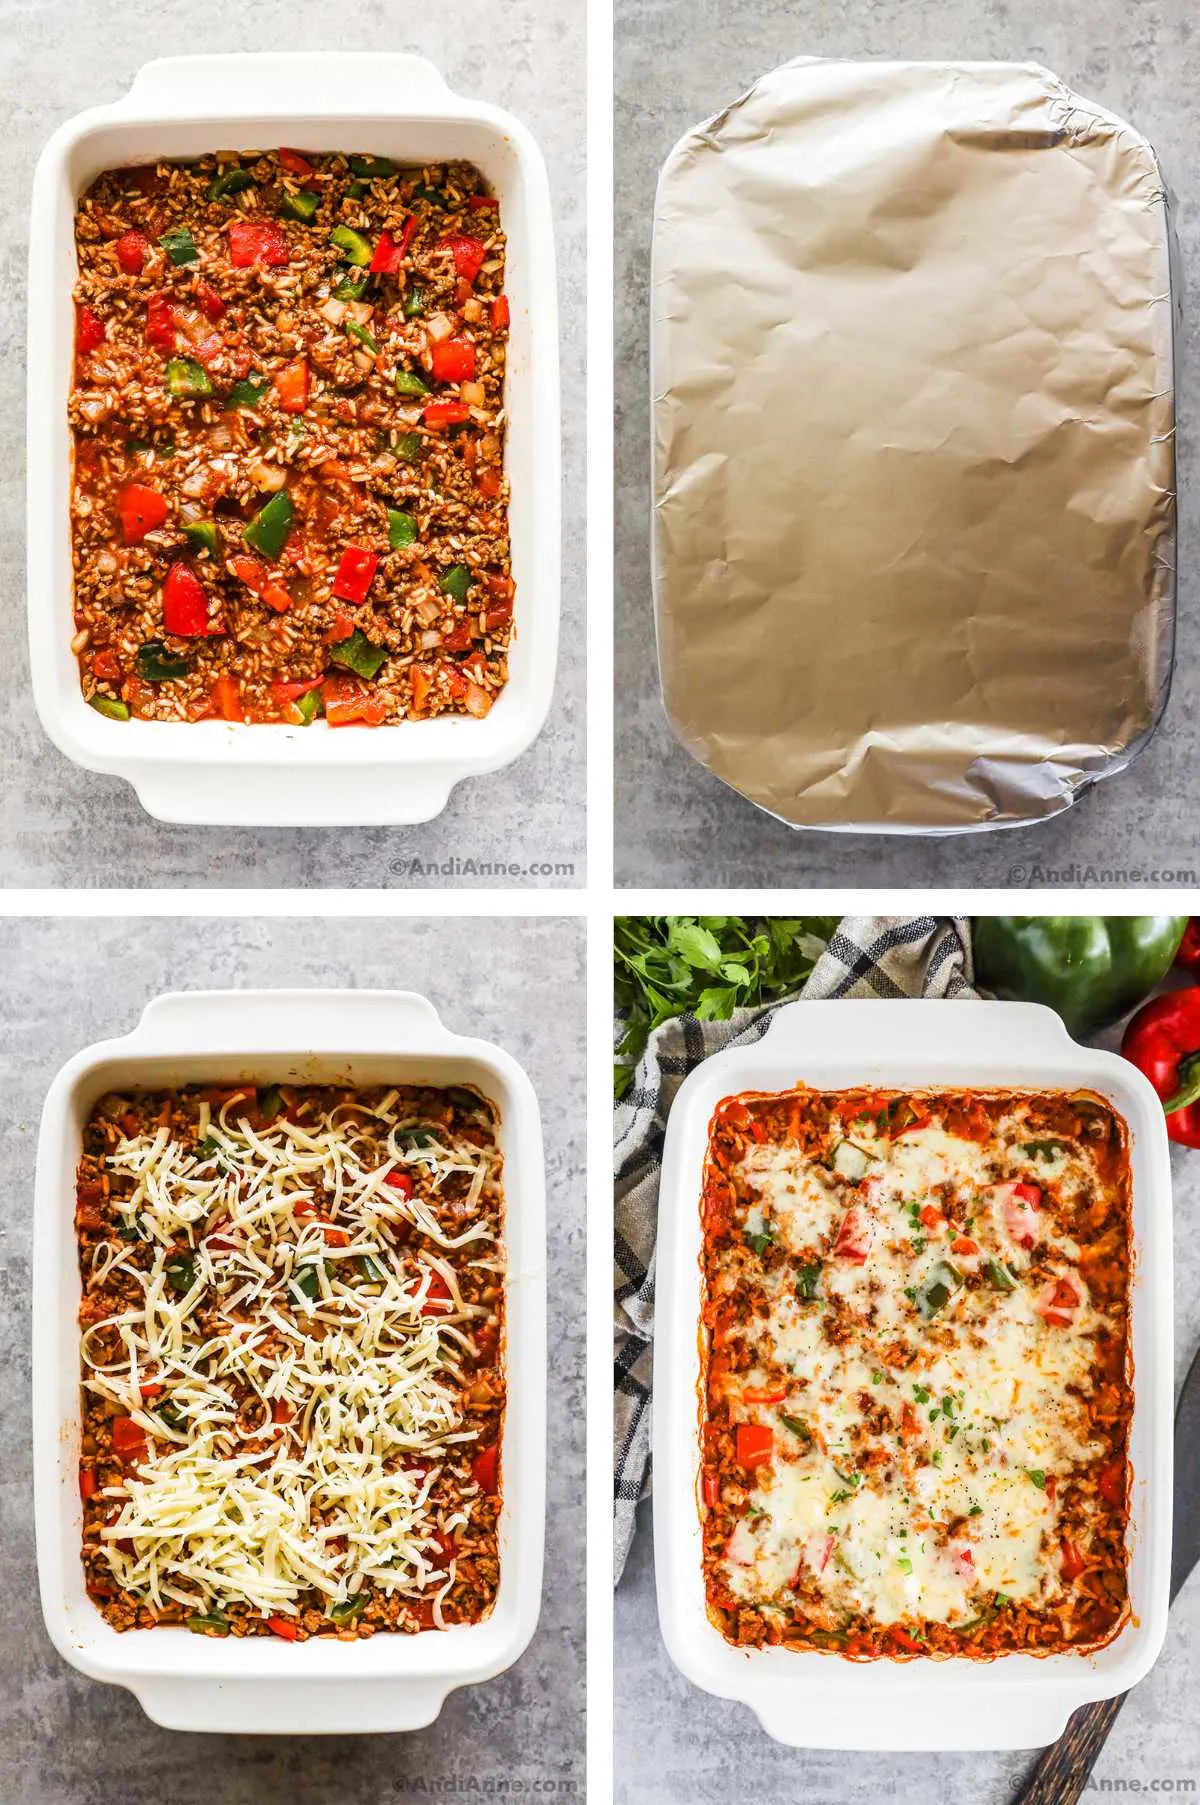 Four overhead images in one: 1. All ingredients are pressed flat in white casserole dish. 2. Casserole dish is covered with tin foil. 3. Cooked dish is removed from oven, tin foil is removed and cheese is added. 4. Finished casserole with melted cheese surrounded by fresh bell peppers, parsley and a wooden spoon.